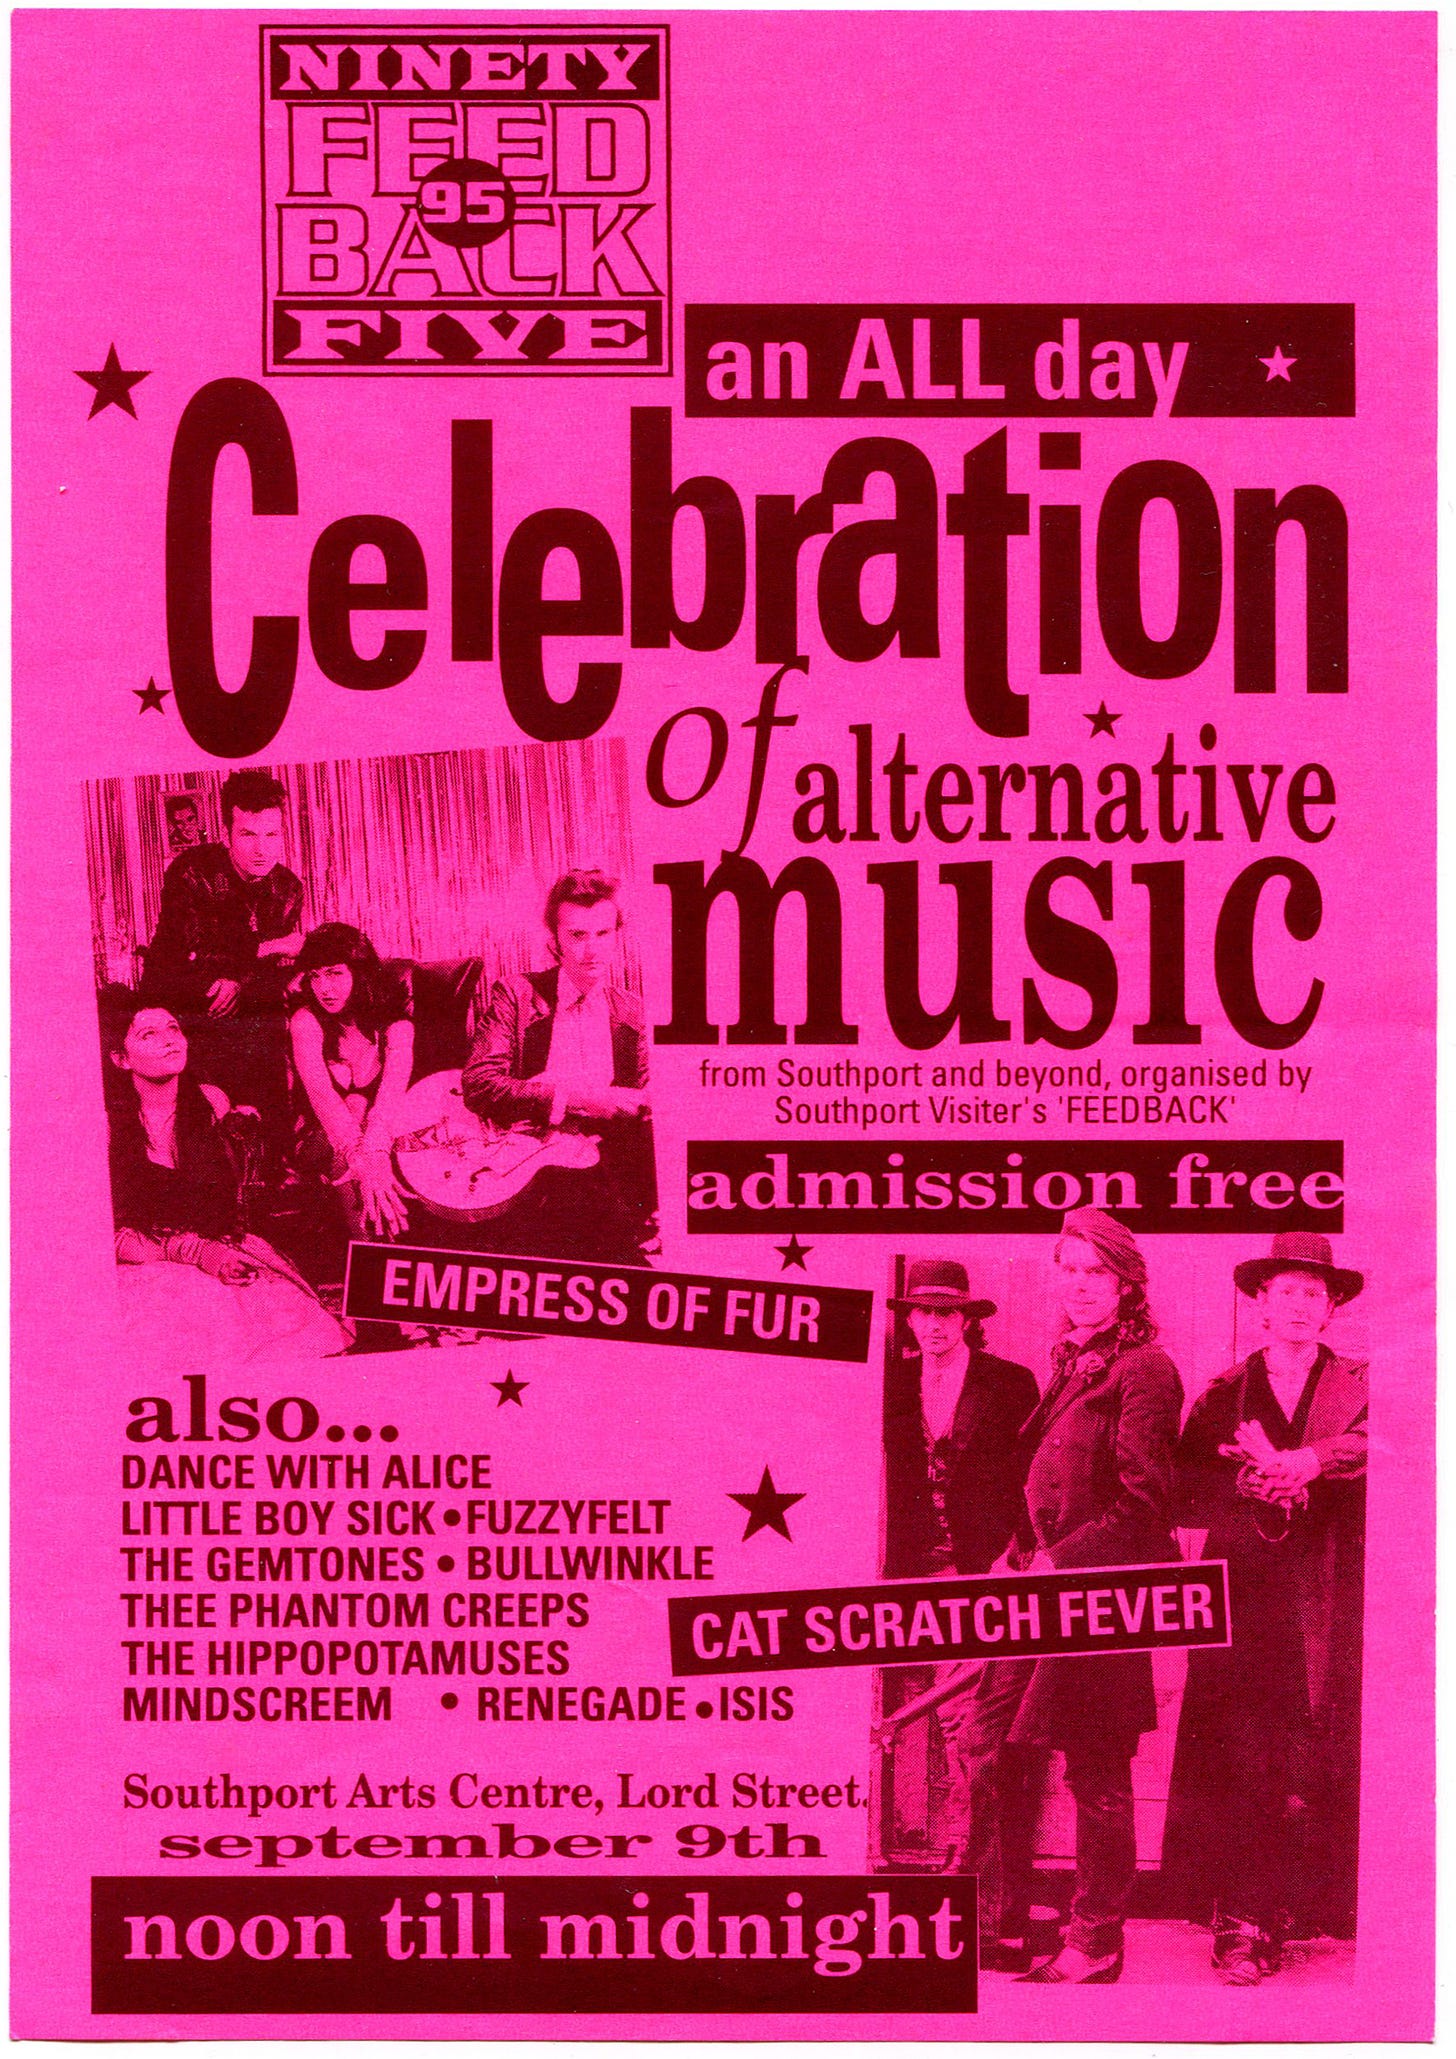 Flyer for "an all day celebration of alternative music" at Southport Arts Centre,9th September 1995. Includes a photo of Cat Scratch Fever.